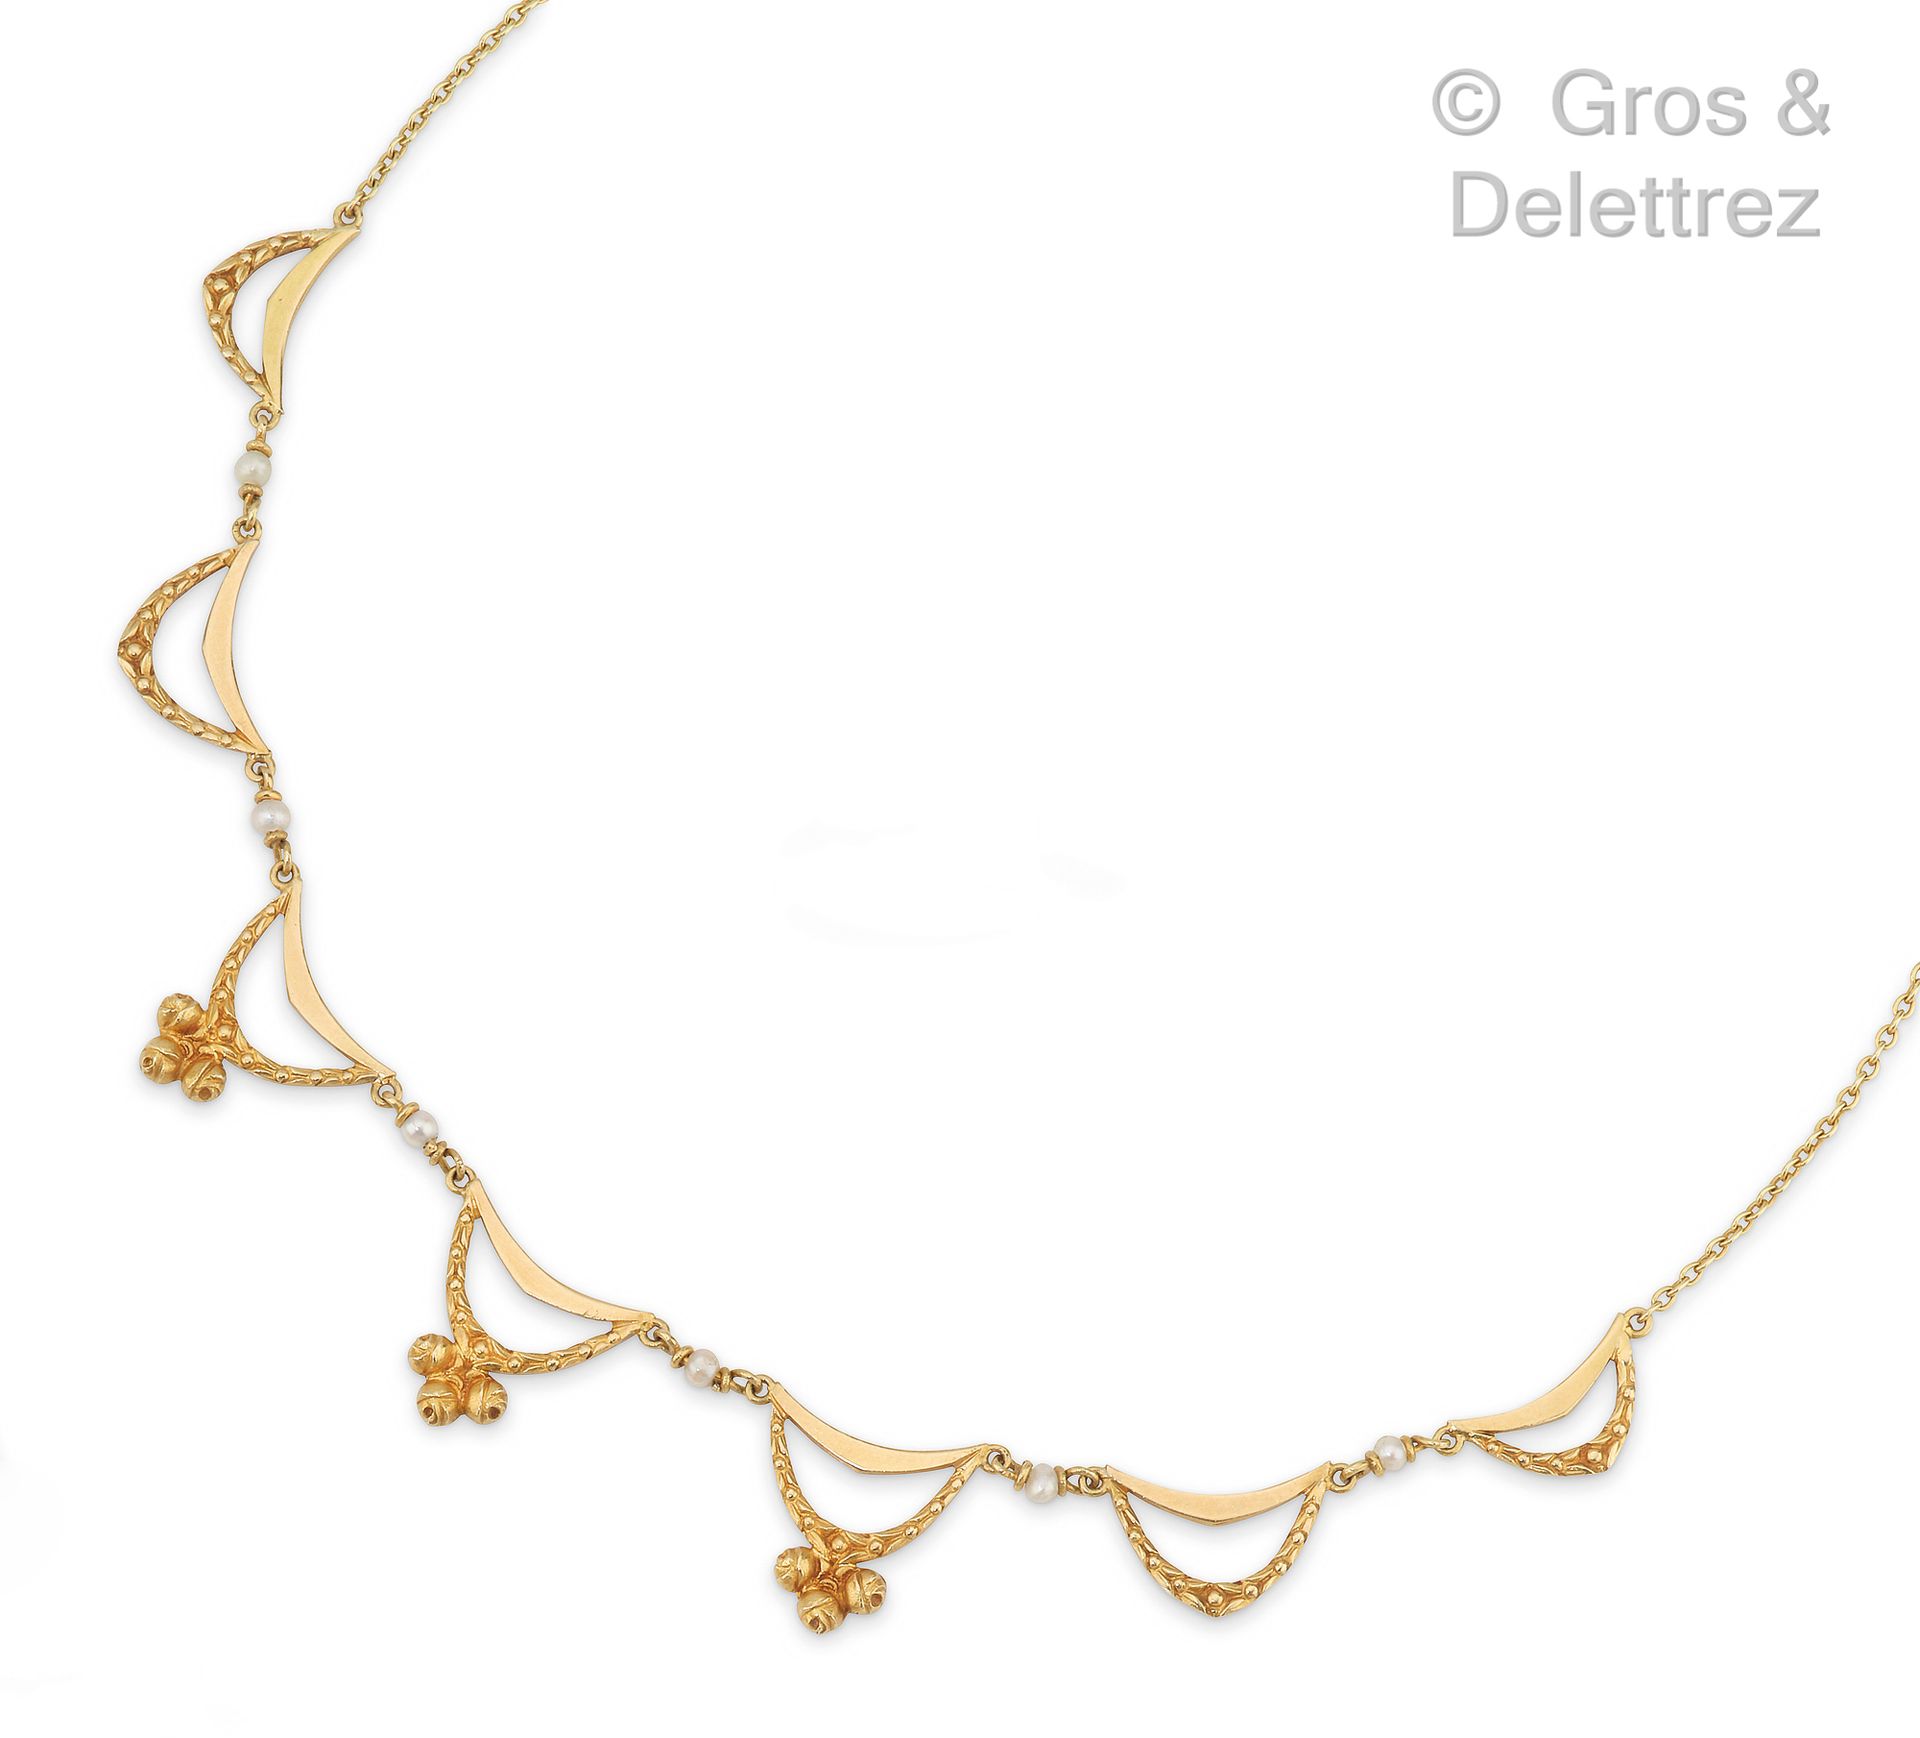 Null Necklace "Drapery" in yellow gold decorated with garlands of flowers and ch&hellip;